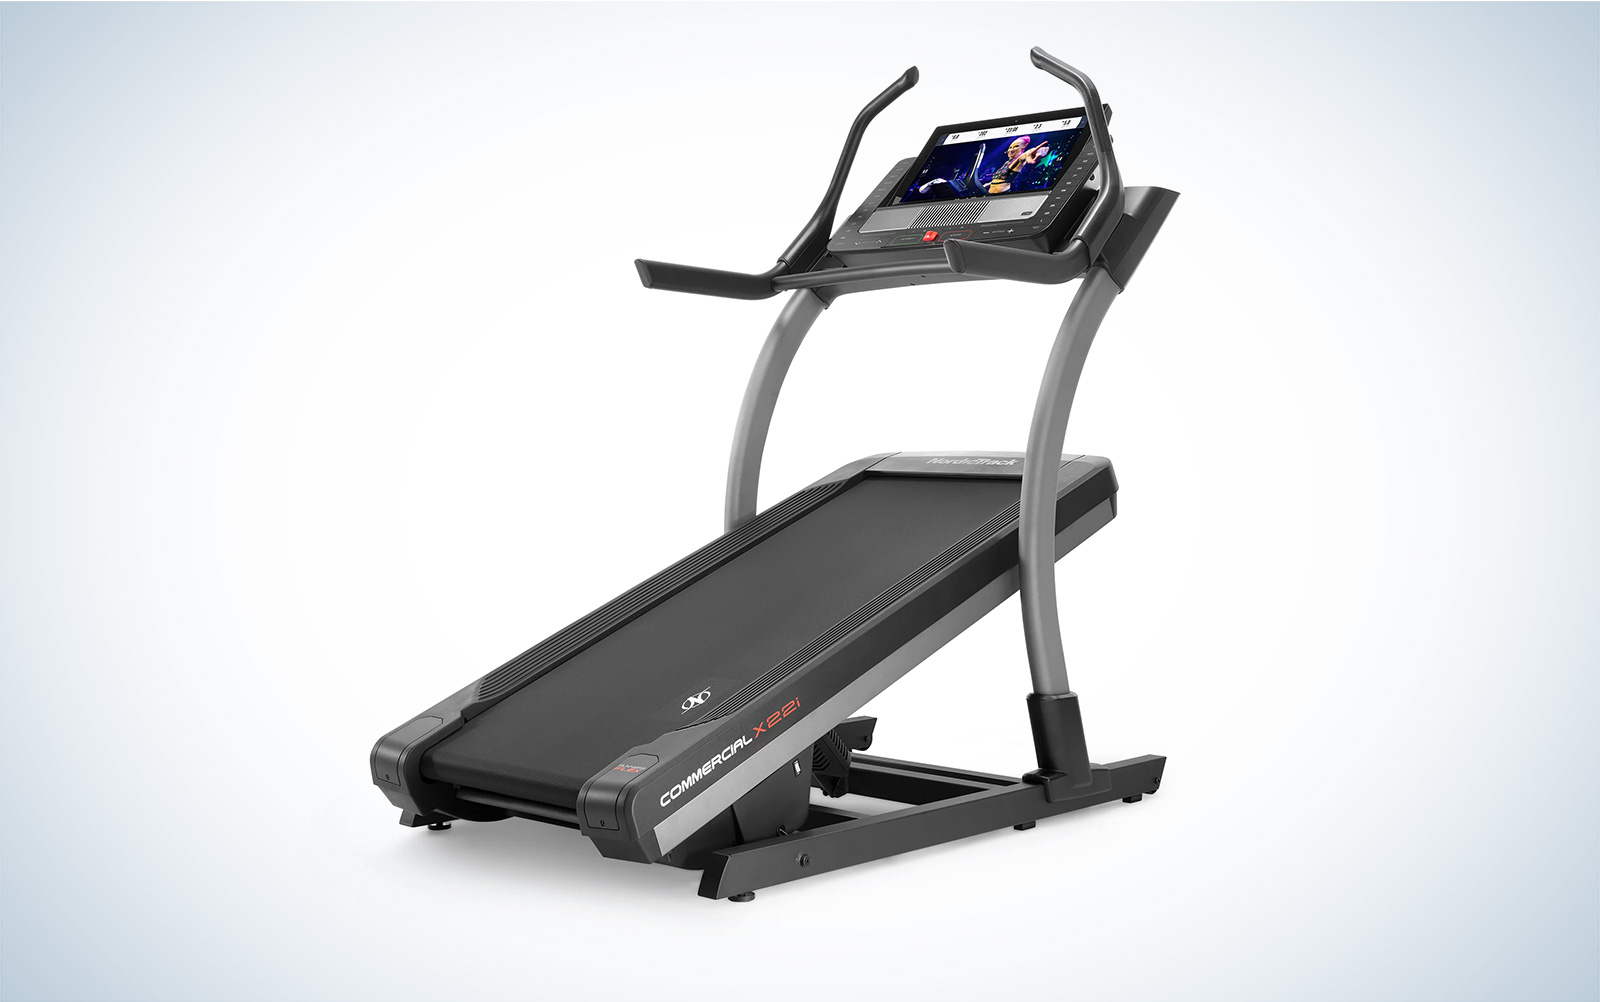 NordicTrack X22i commercial treadmill on a plain background